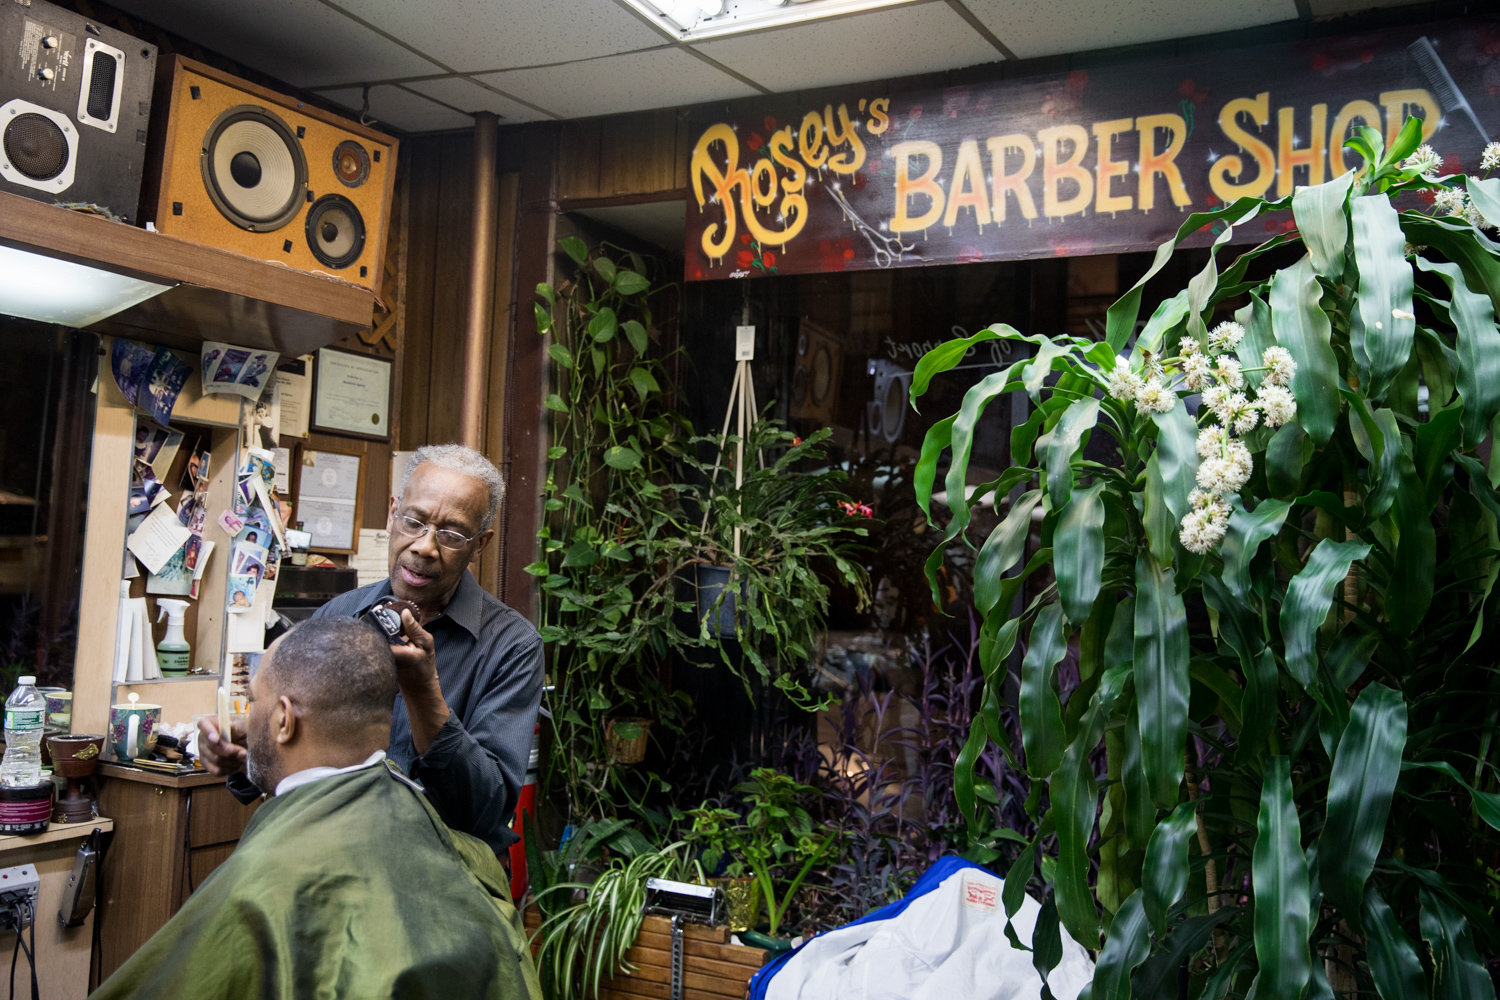 Roosevelt Spivey shaves J. Loren Russell’s hair in Marble Hill’s International Unisex Salon, known to patrons as Rosey’s Barber Shop. Spivey’s salon is facing an uncertain future after learning his shop rent is jumping $1,500 a month.